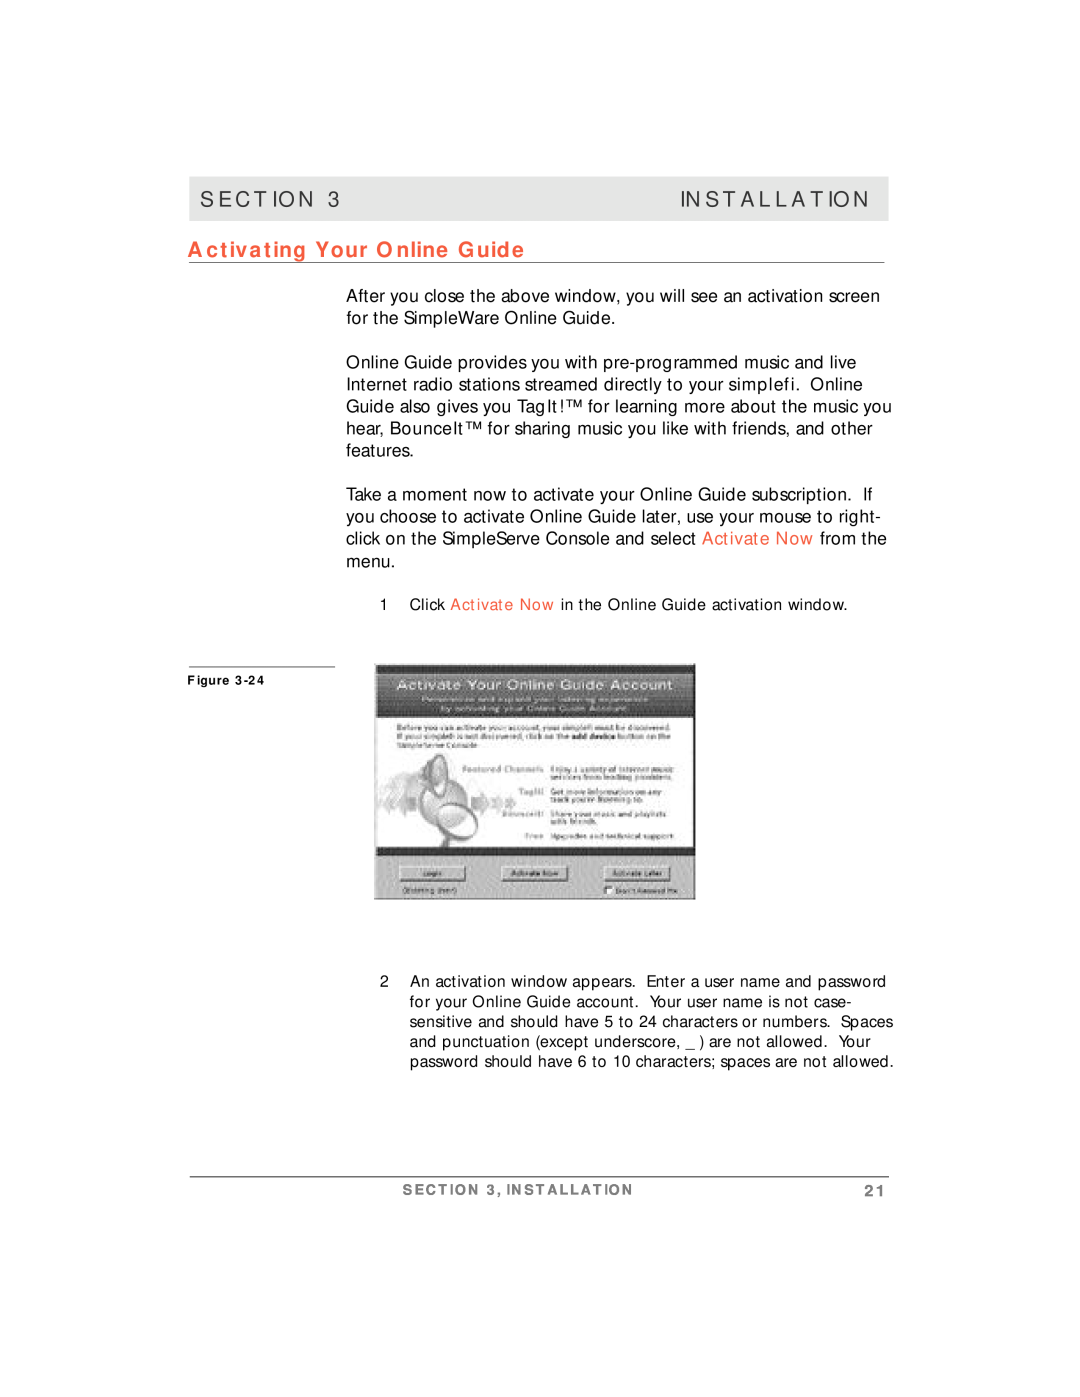 Motorola simplefi manual Activating Your Online Guide, Section, Installation 